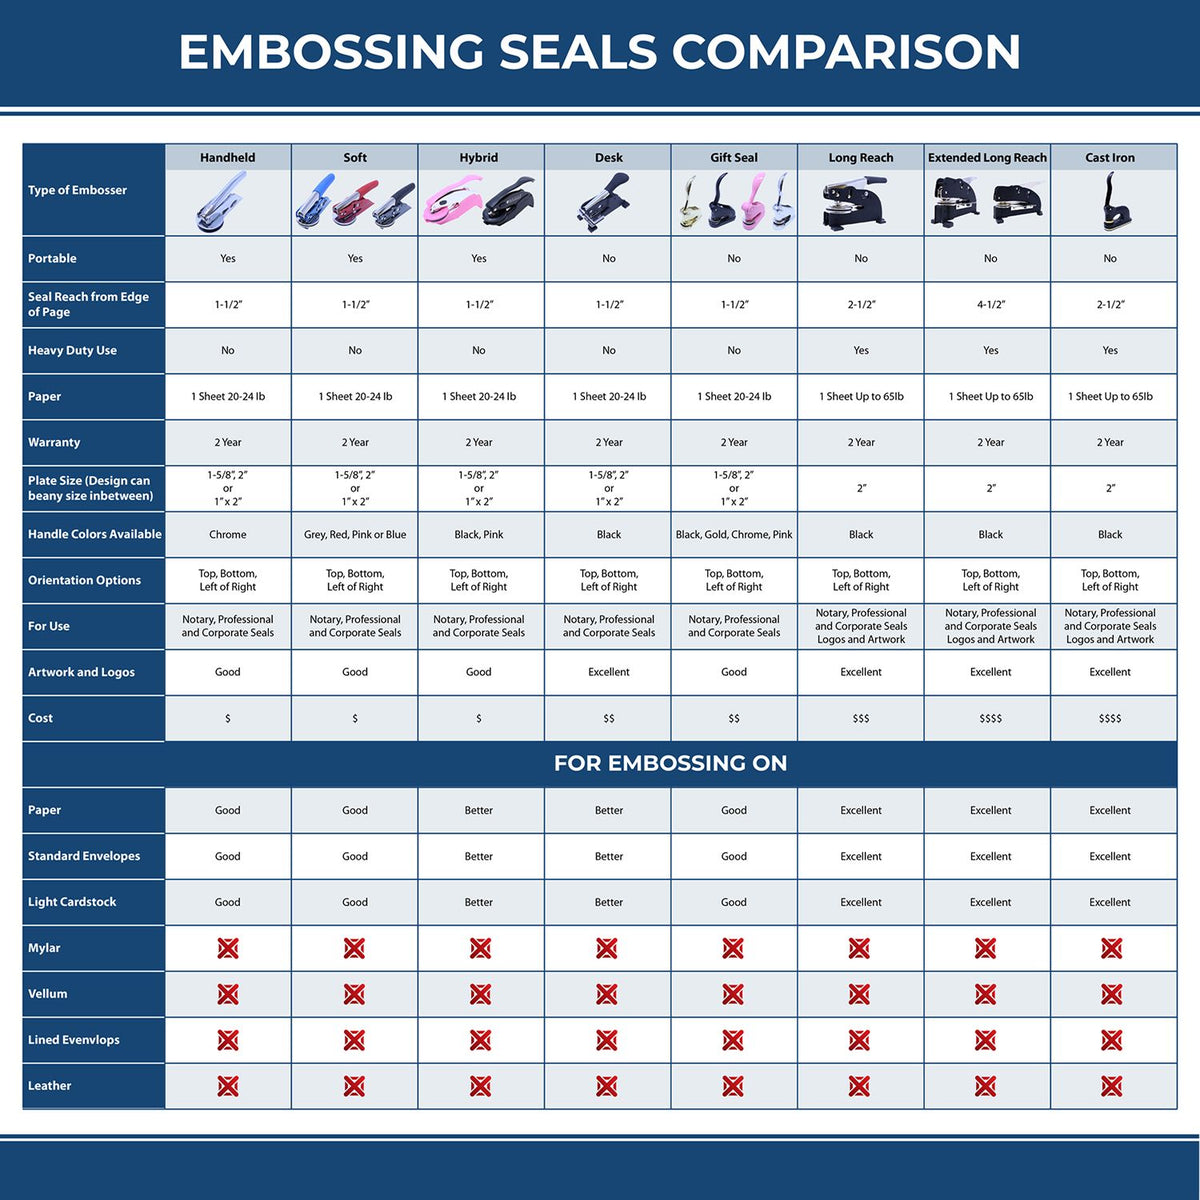 A comparison chart for the different types of mount models available for the Heavy Duty Cast Iron New Jersey Geologist Seal Embosser